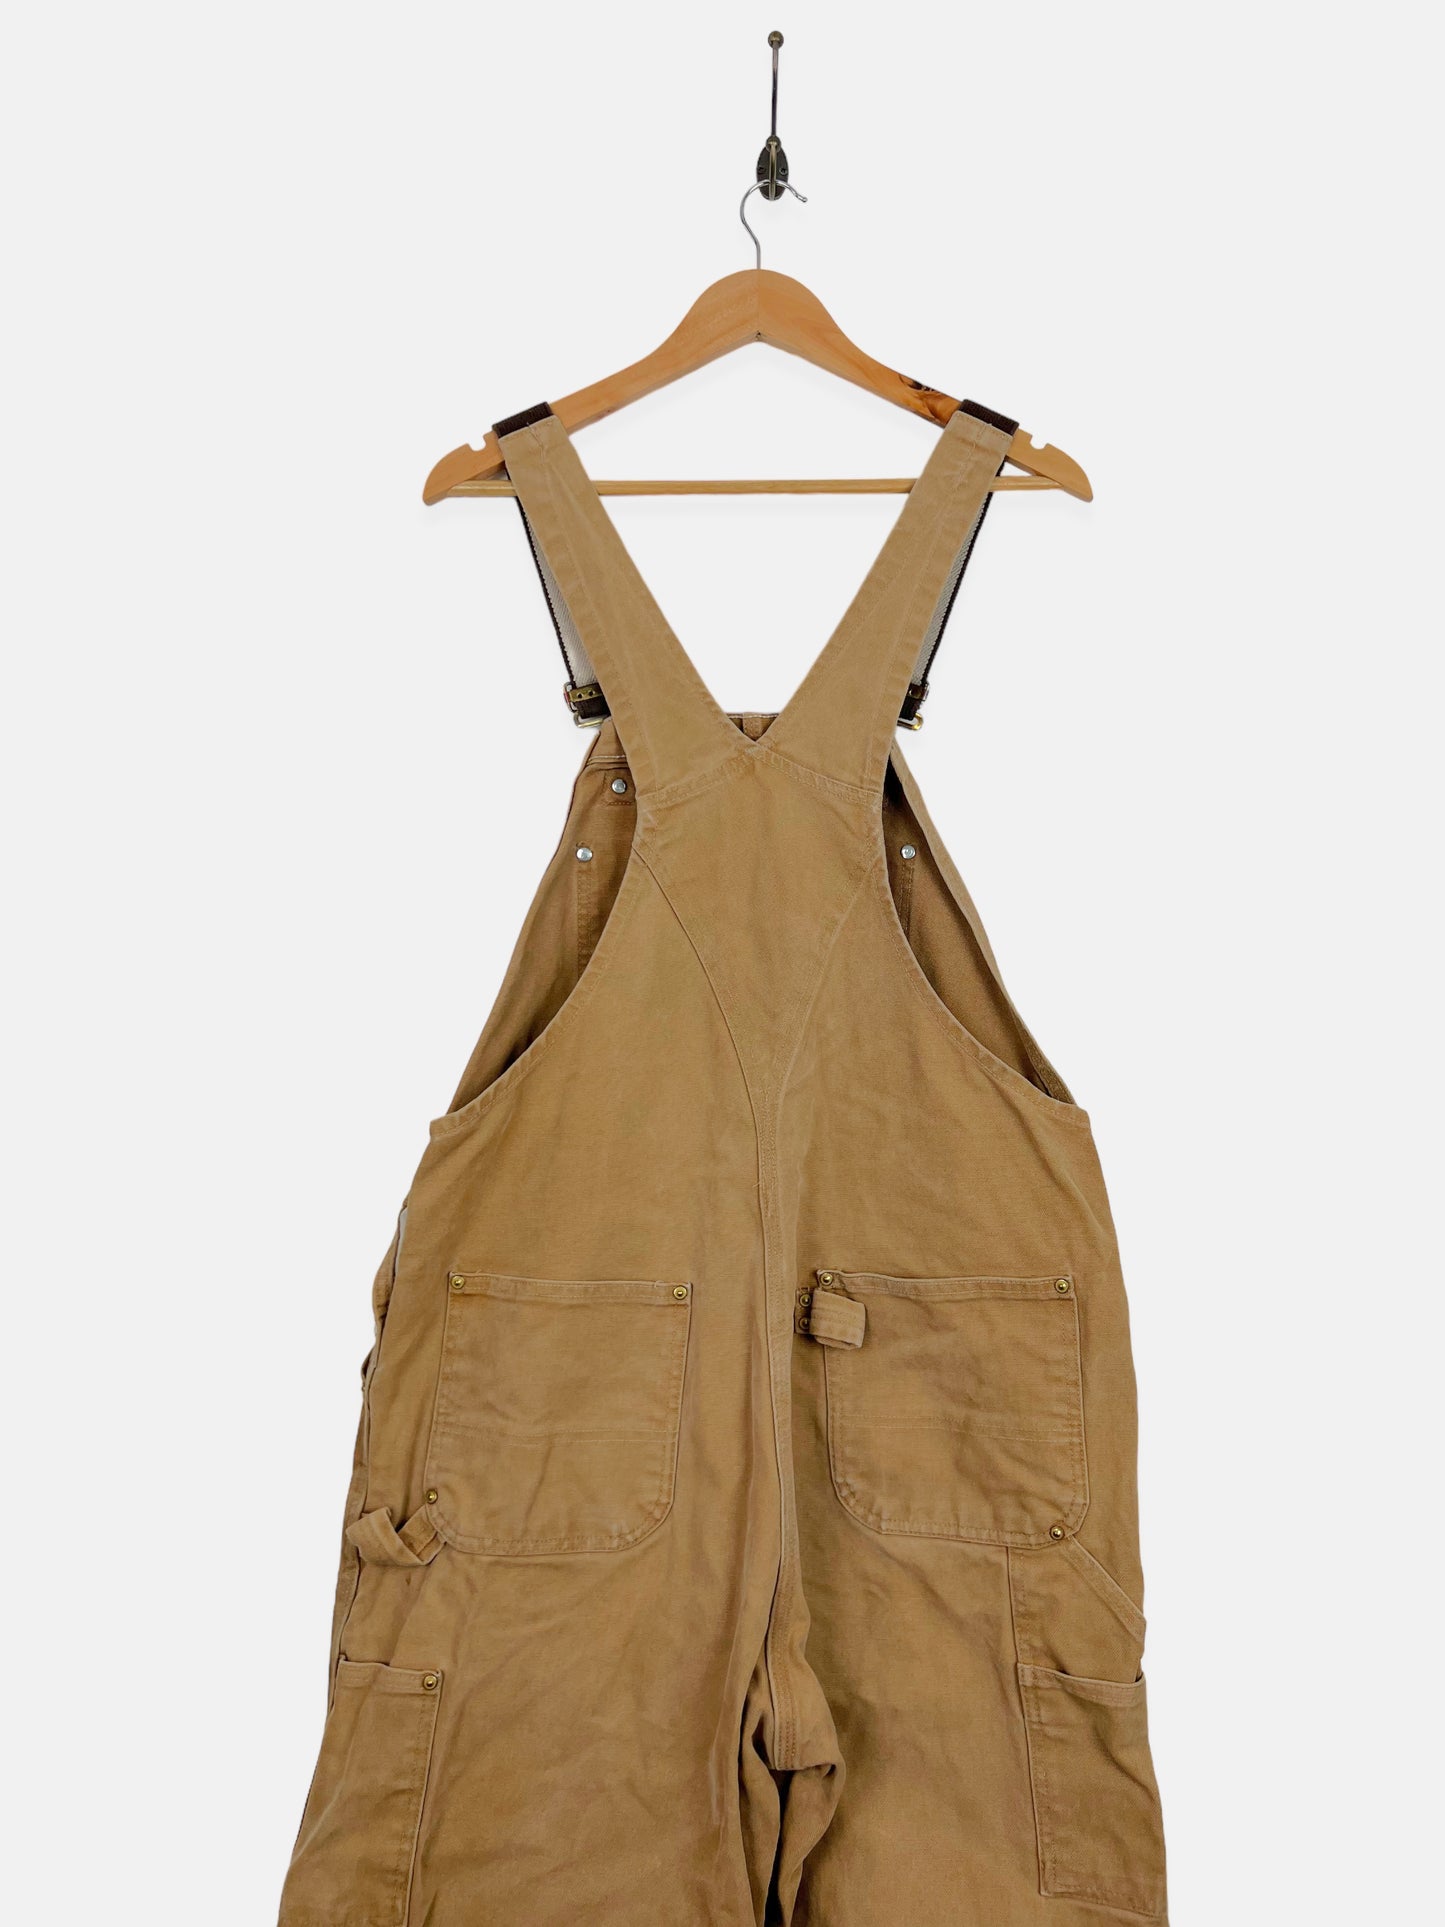 90's Carhartt Heavy Duty Vintage Dungarees/Overalls up to Size 40"